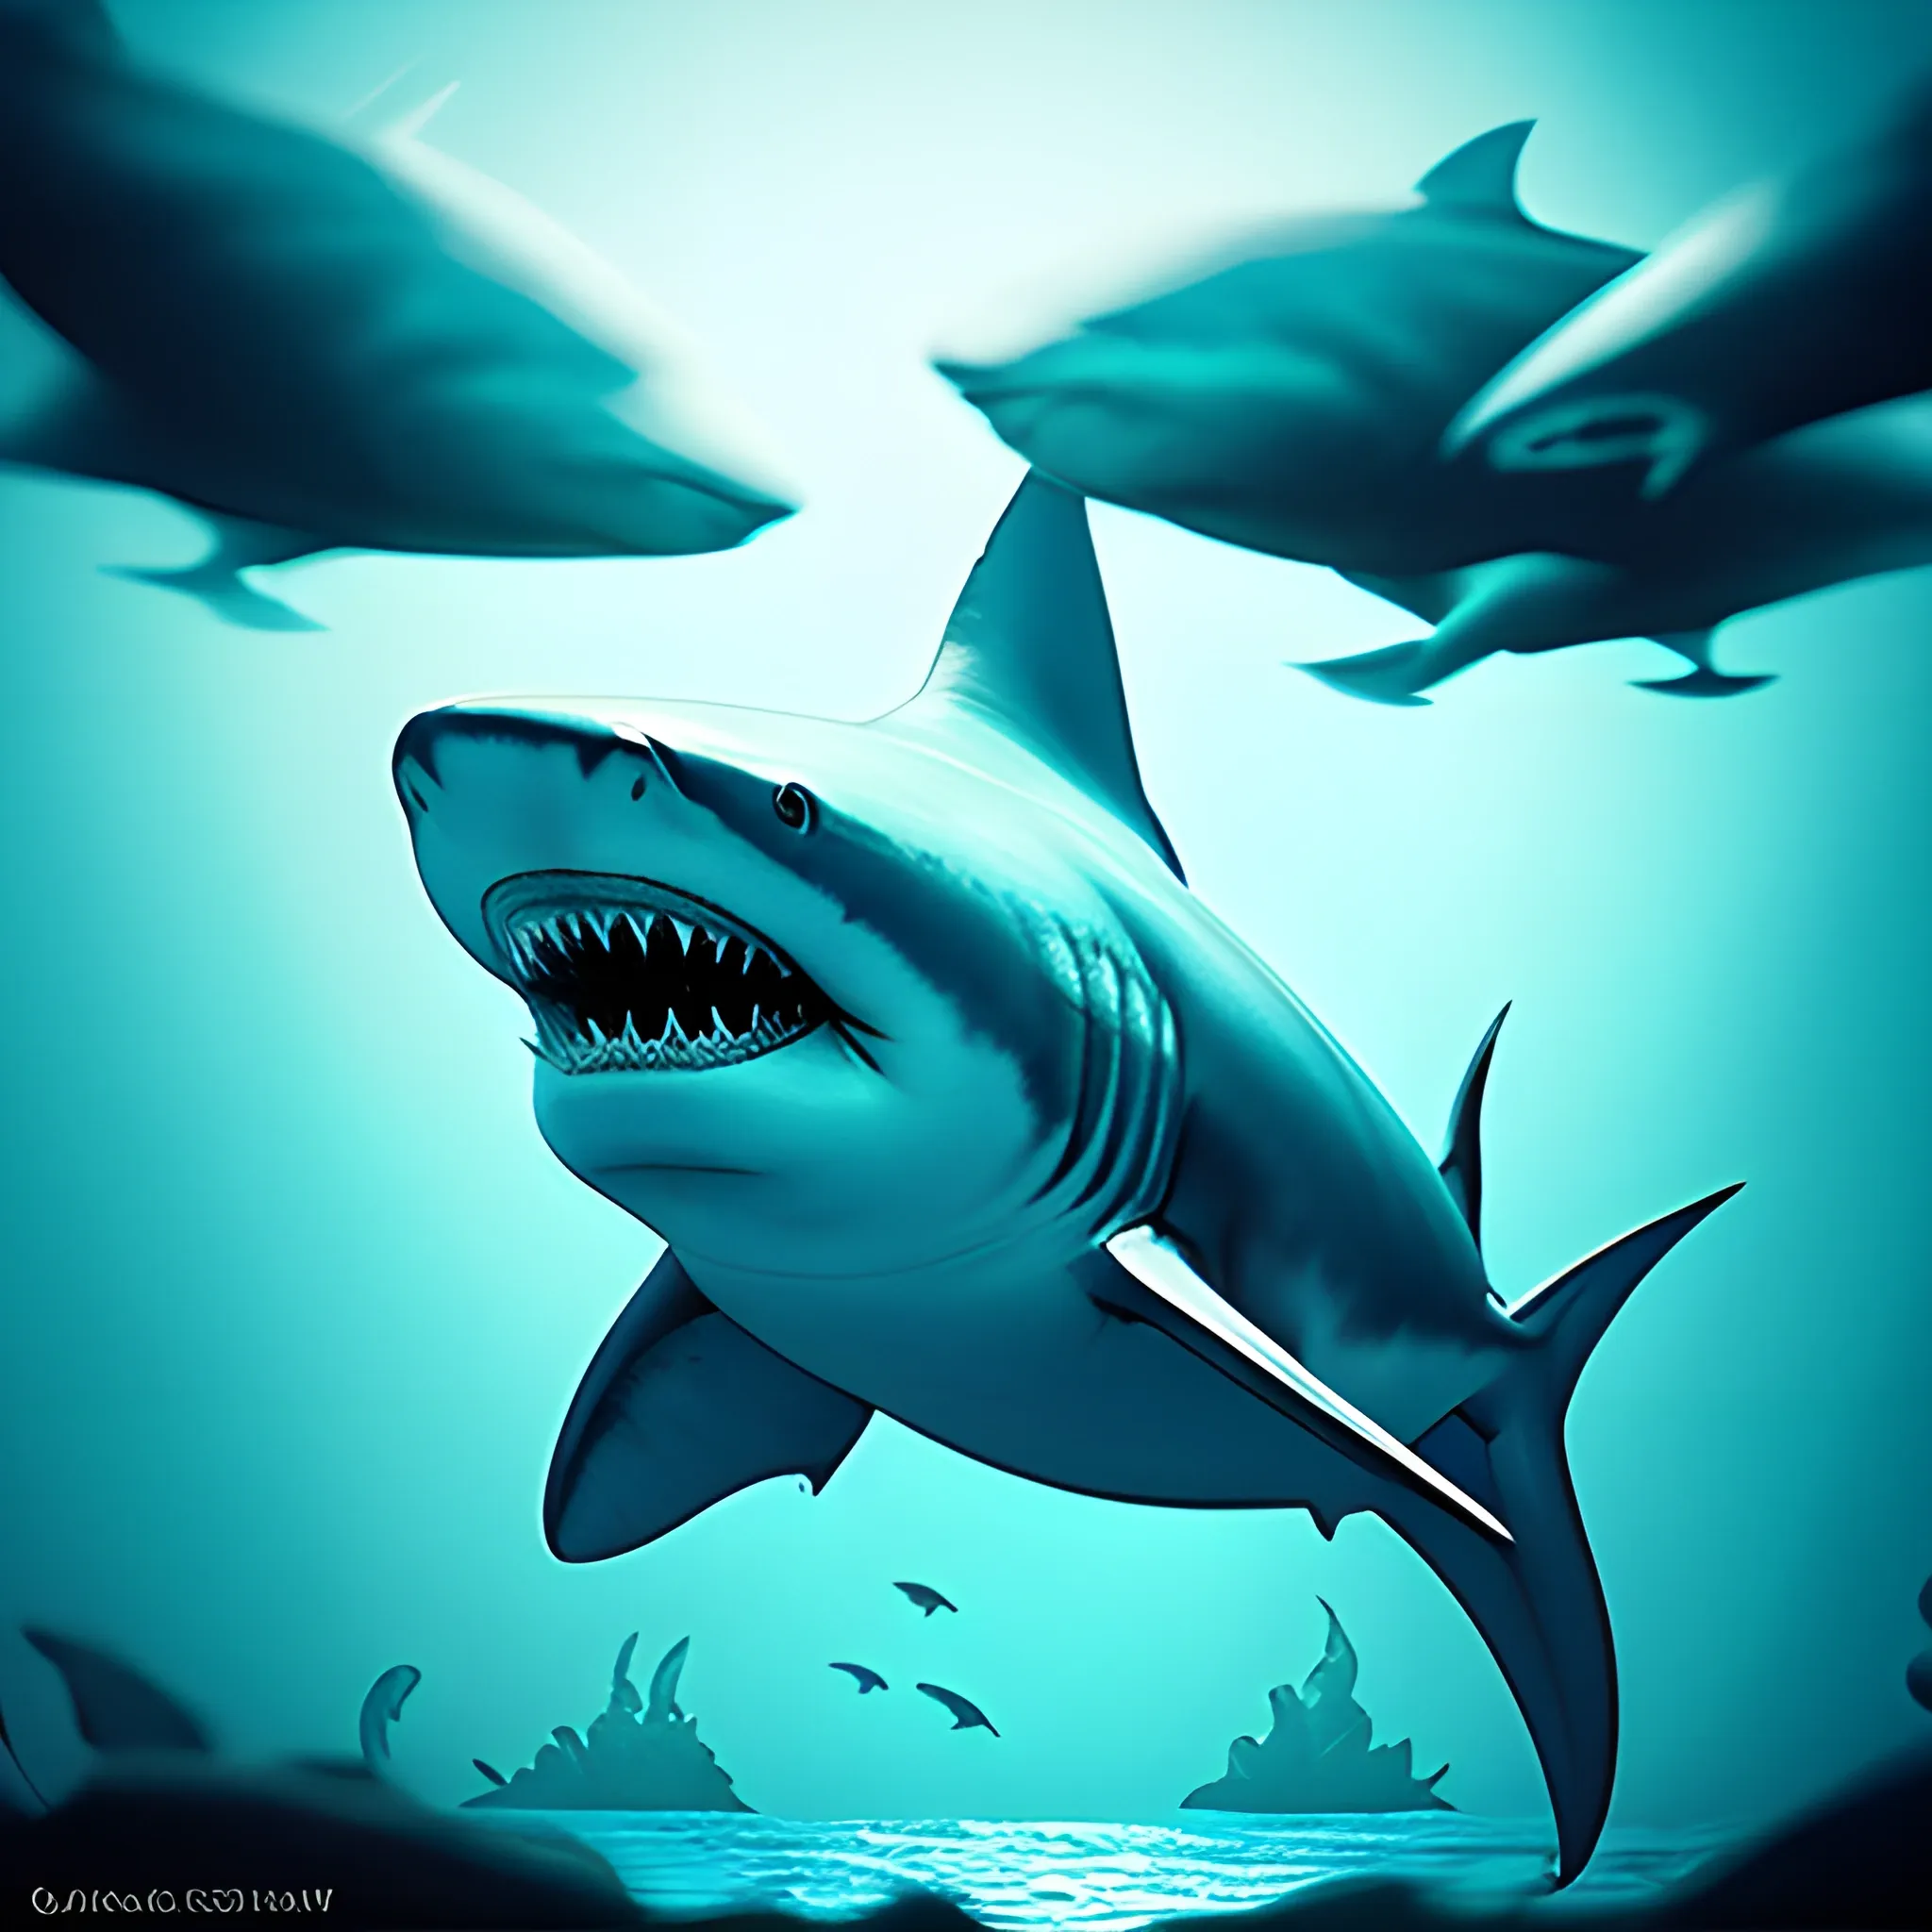 Large shark-like , open mouth and sharp teeth focused on the camera while its body and dorsal fin are seen sideways, under the sea, blue background, masterfully elaboreted, blue background Watercolor, trend in artstation, sharp focus, studio photo, intricate details, very detailed,  Under the sea landscape, no fish, no corals, very dark, too dark, dark fantasy style feeling of fear, dark bacground, ultra-realistic, macro photography, hyperrealistic, landscape, , fantastic blacklight, the camera lets you see a part of sky out of the water